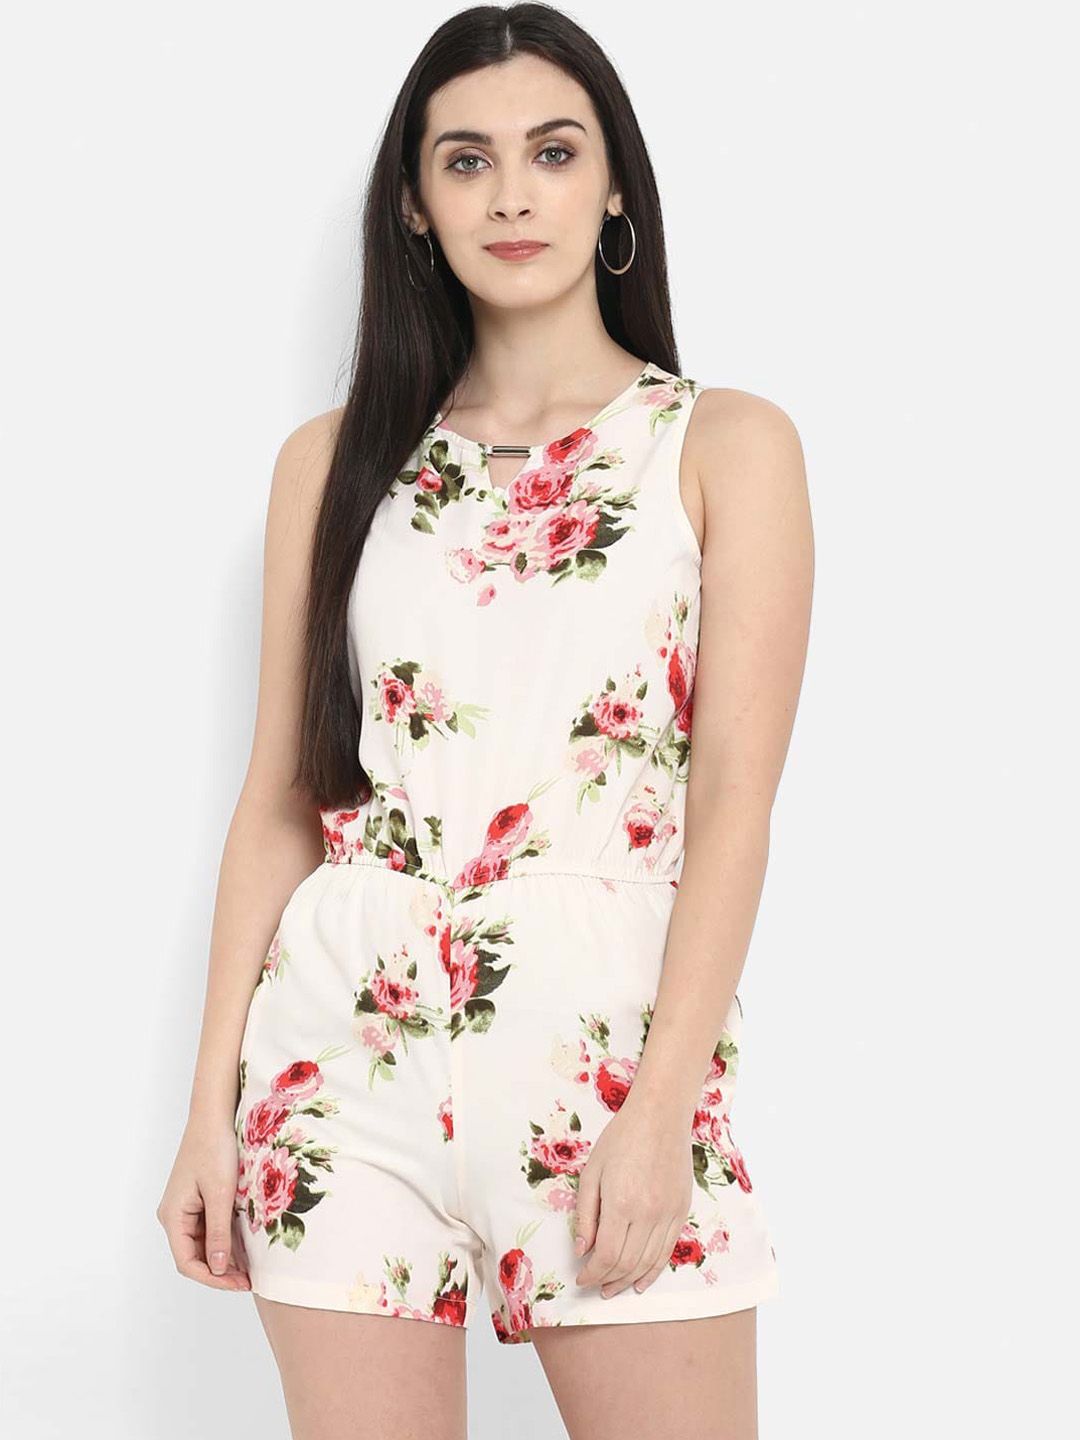 PURYS Women Off-White & Green Printed Playsuit Price in India